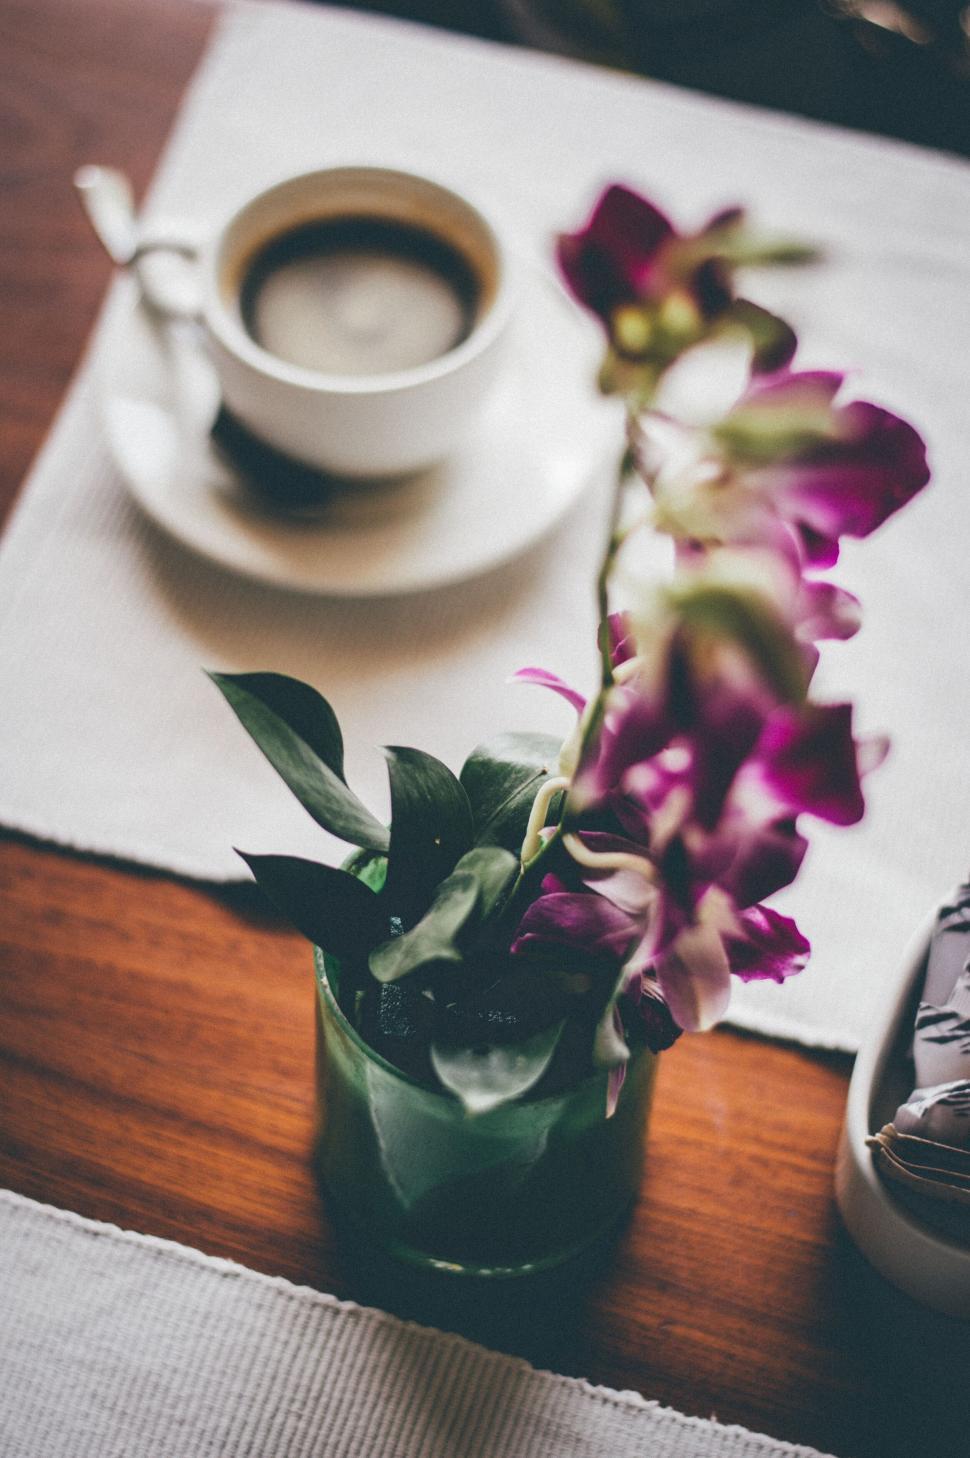 Free Image of Cup of coffee with fresh orchids on table 